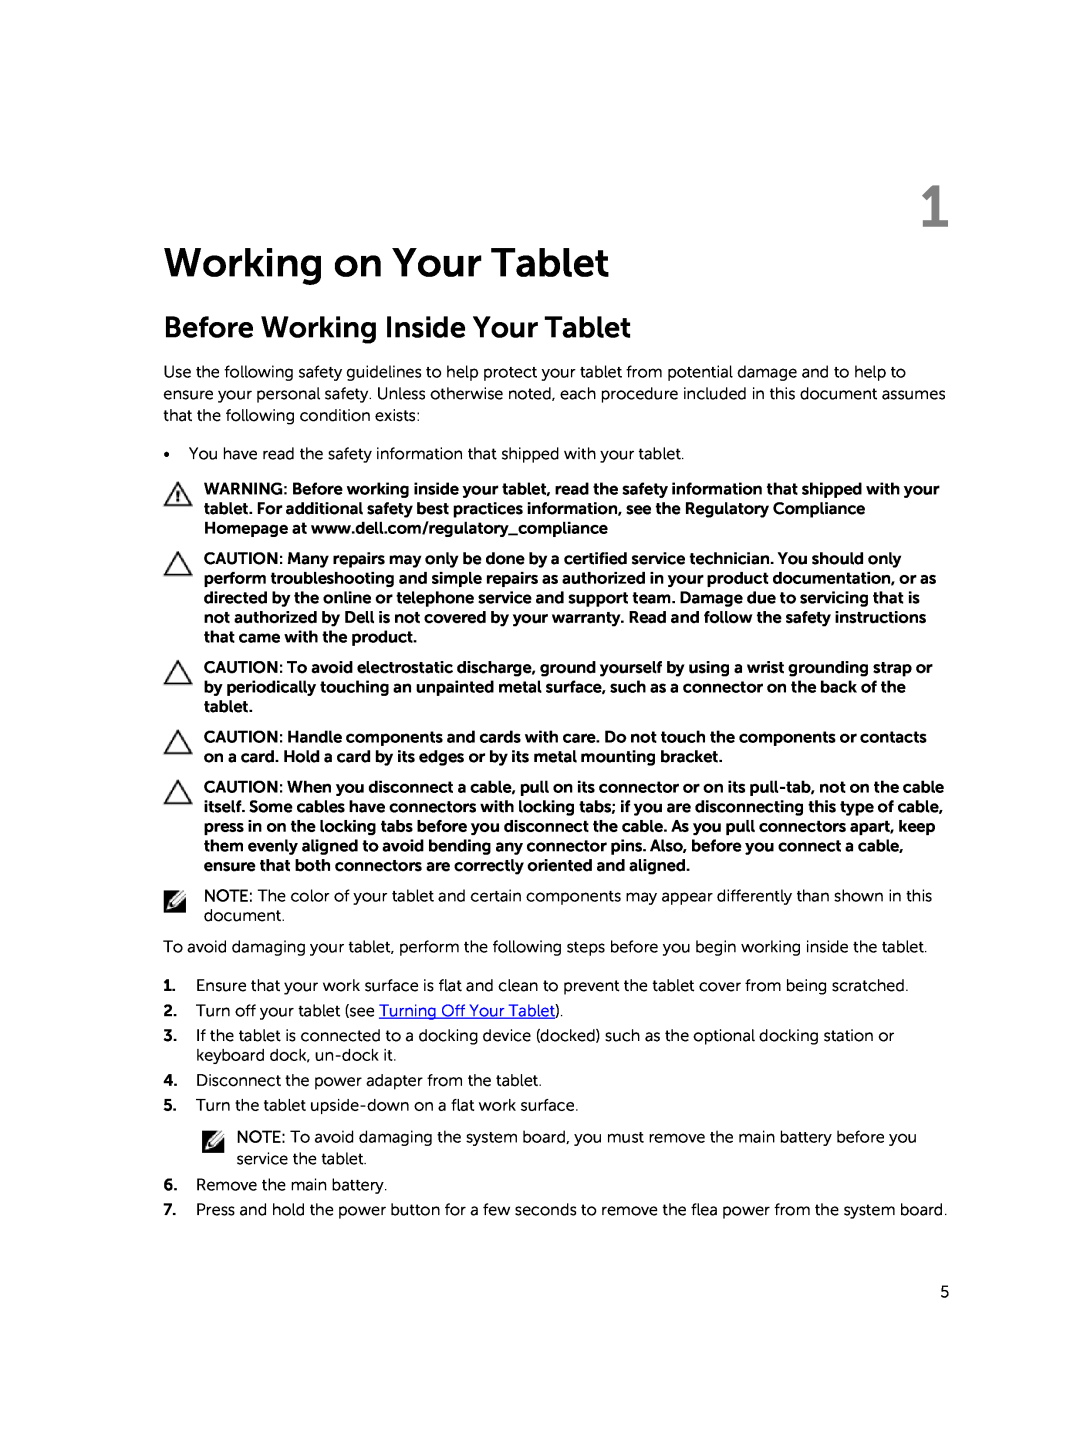 Dell T06G manual Working on Your Tablet, Before Working Inside Your Tablet 